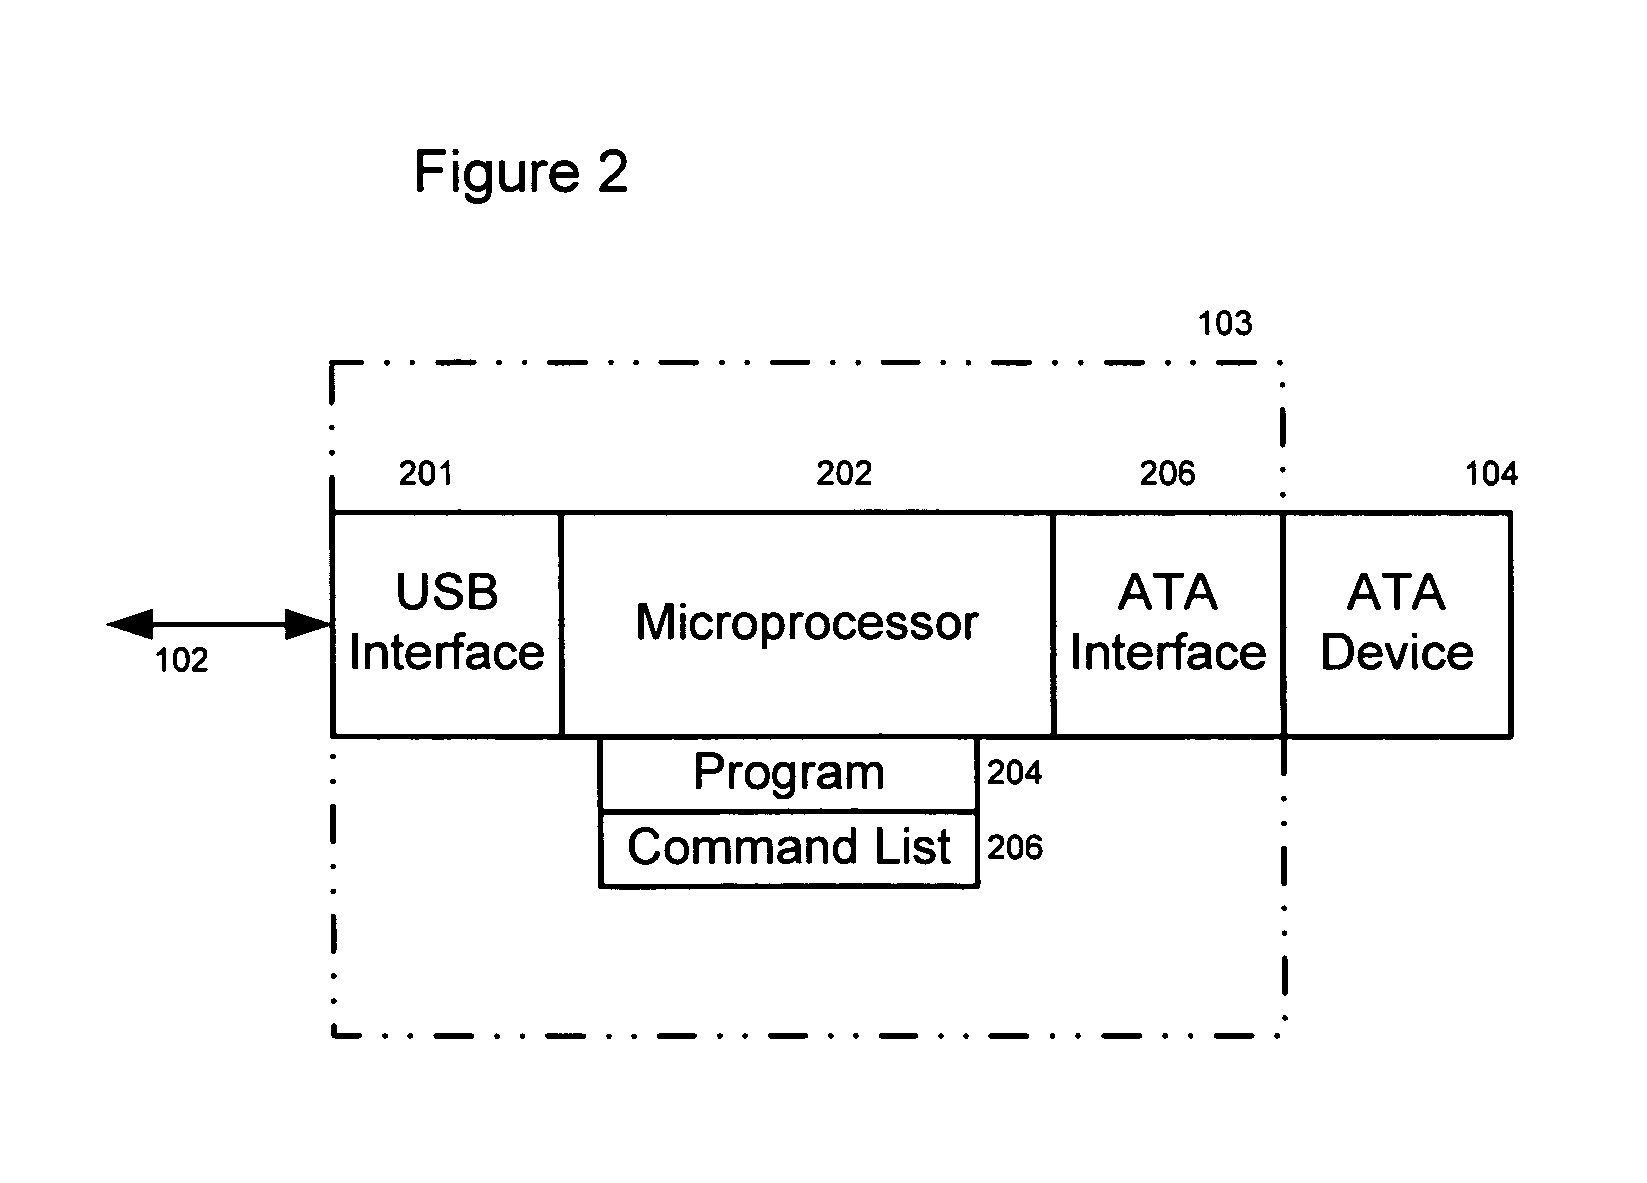 Adaptive USB mass storage devices that reduce power consumption